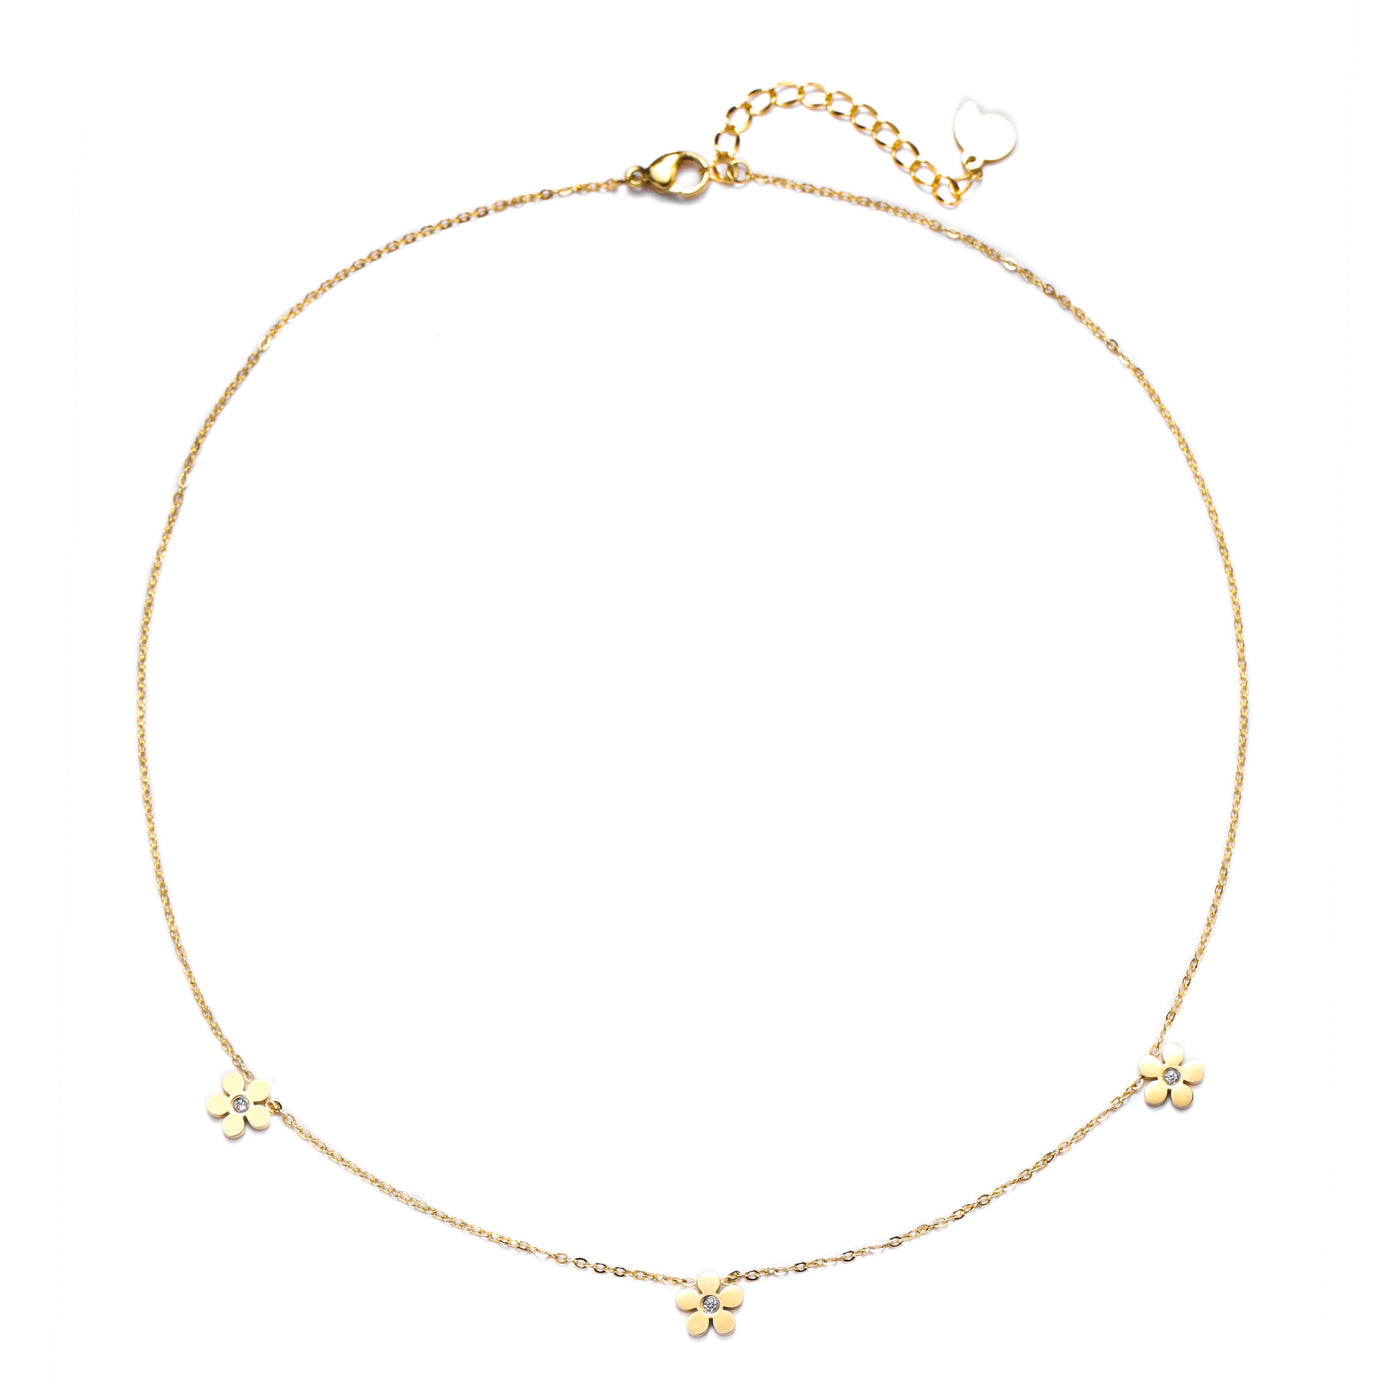 Forget-Me-Not Charm Necklace Gold